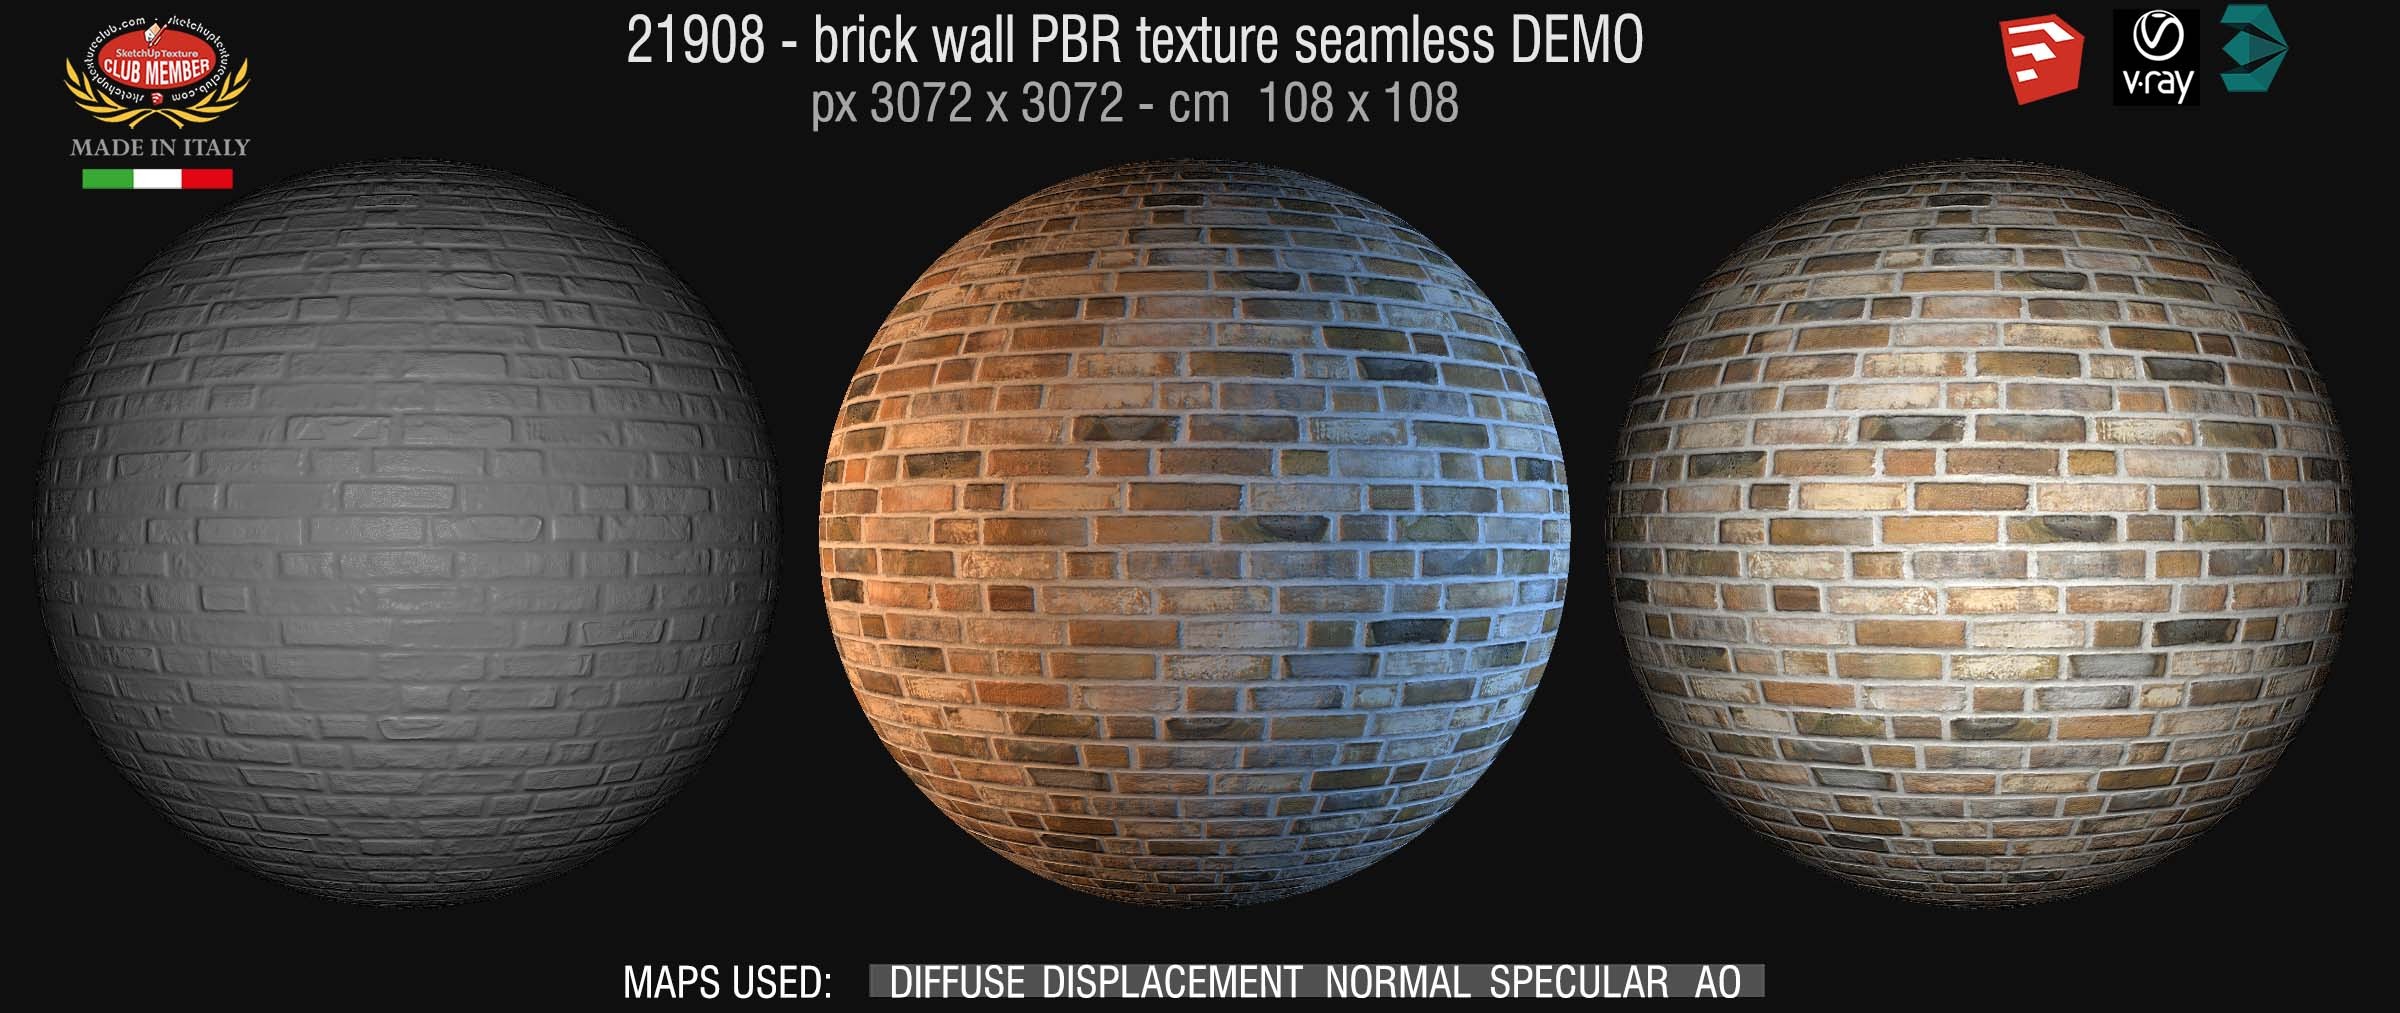 21908 brick wall PBR texture seamless DEMO - If you like our textures, support us by becoming a CLUB MEMBER !